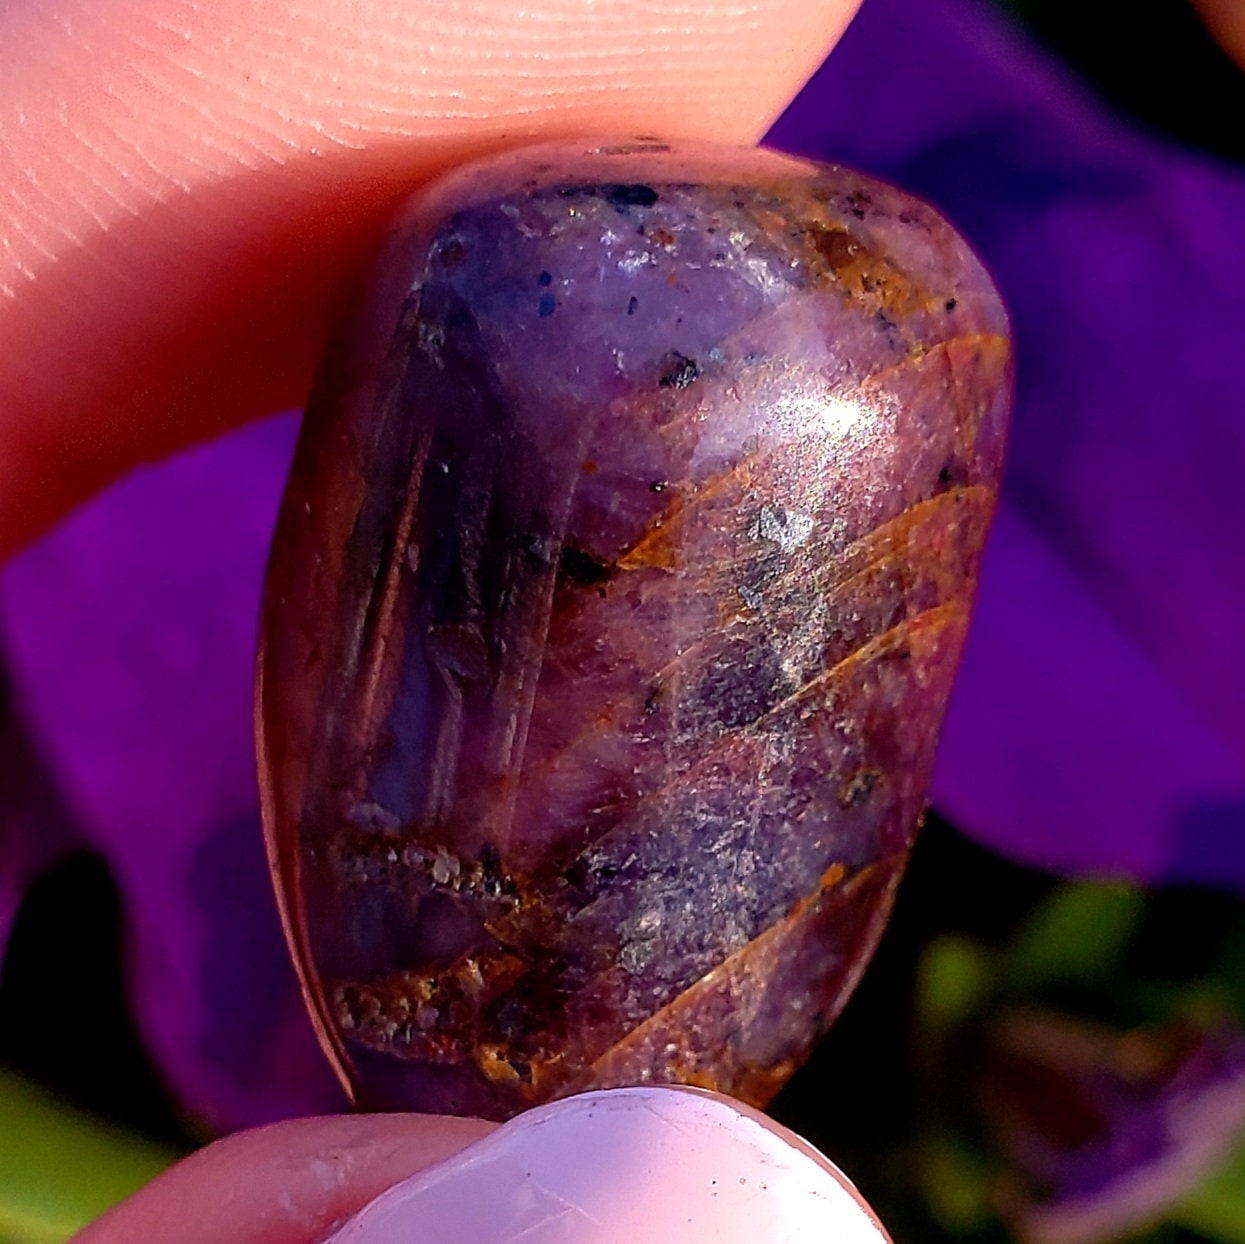 Tumbled Polished Natural Ruby Repidolite For Wicca Reiki Healing Crystal #rr200 